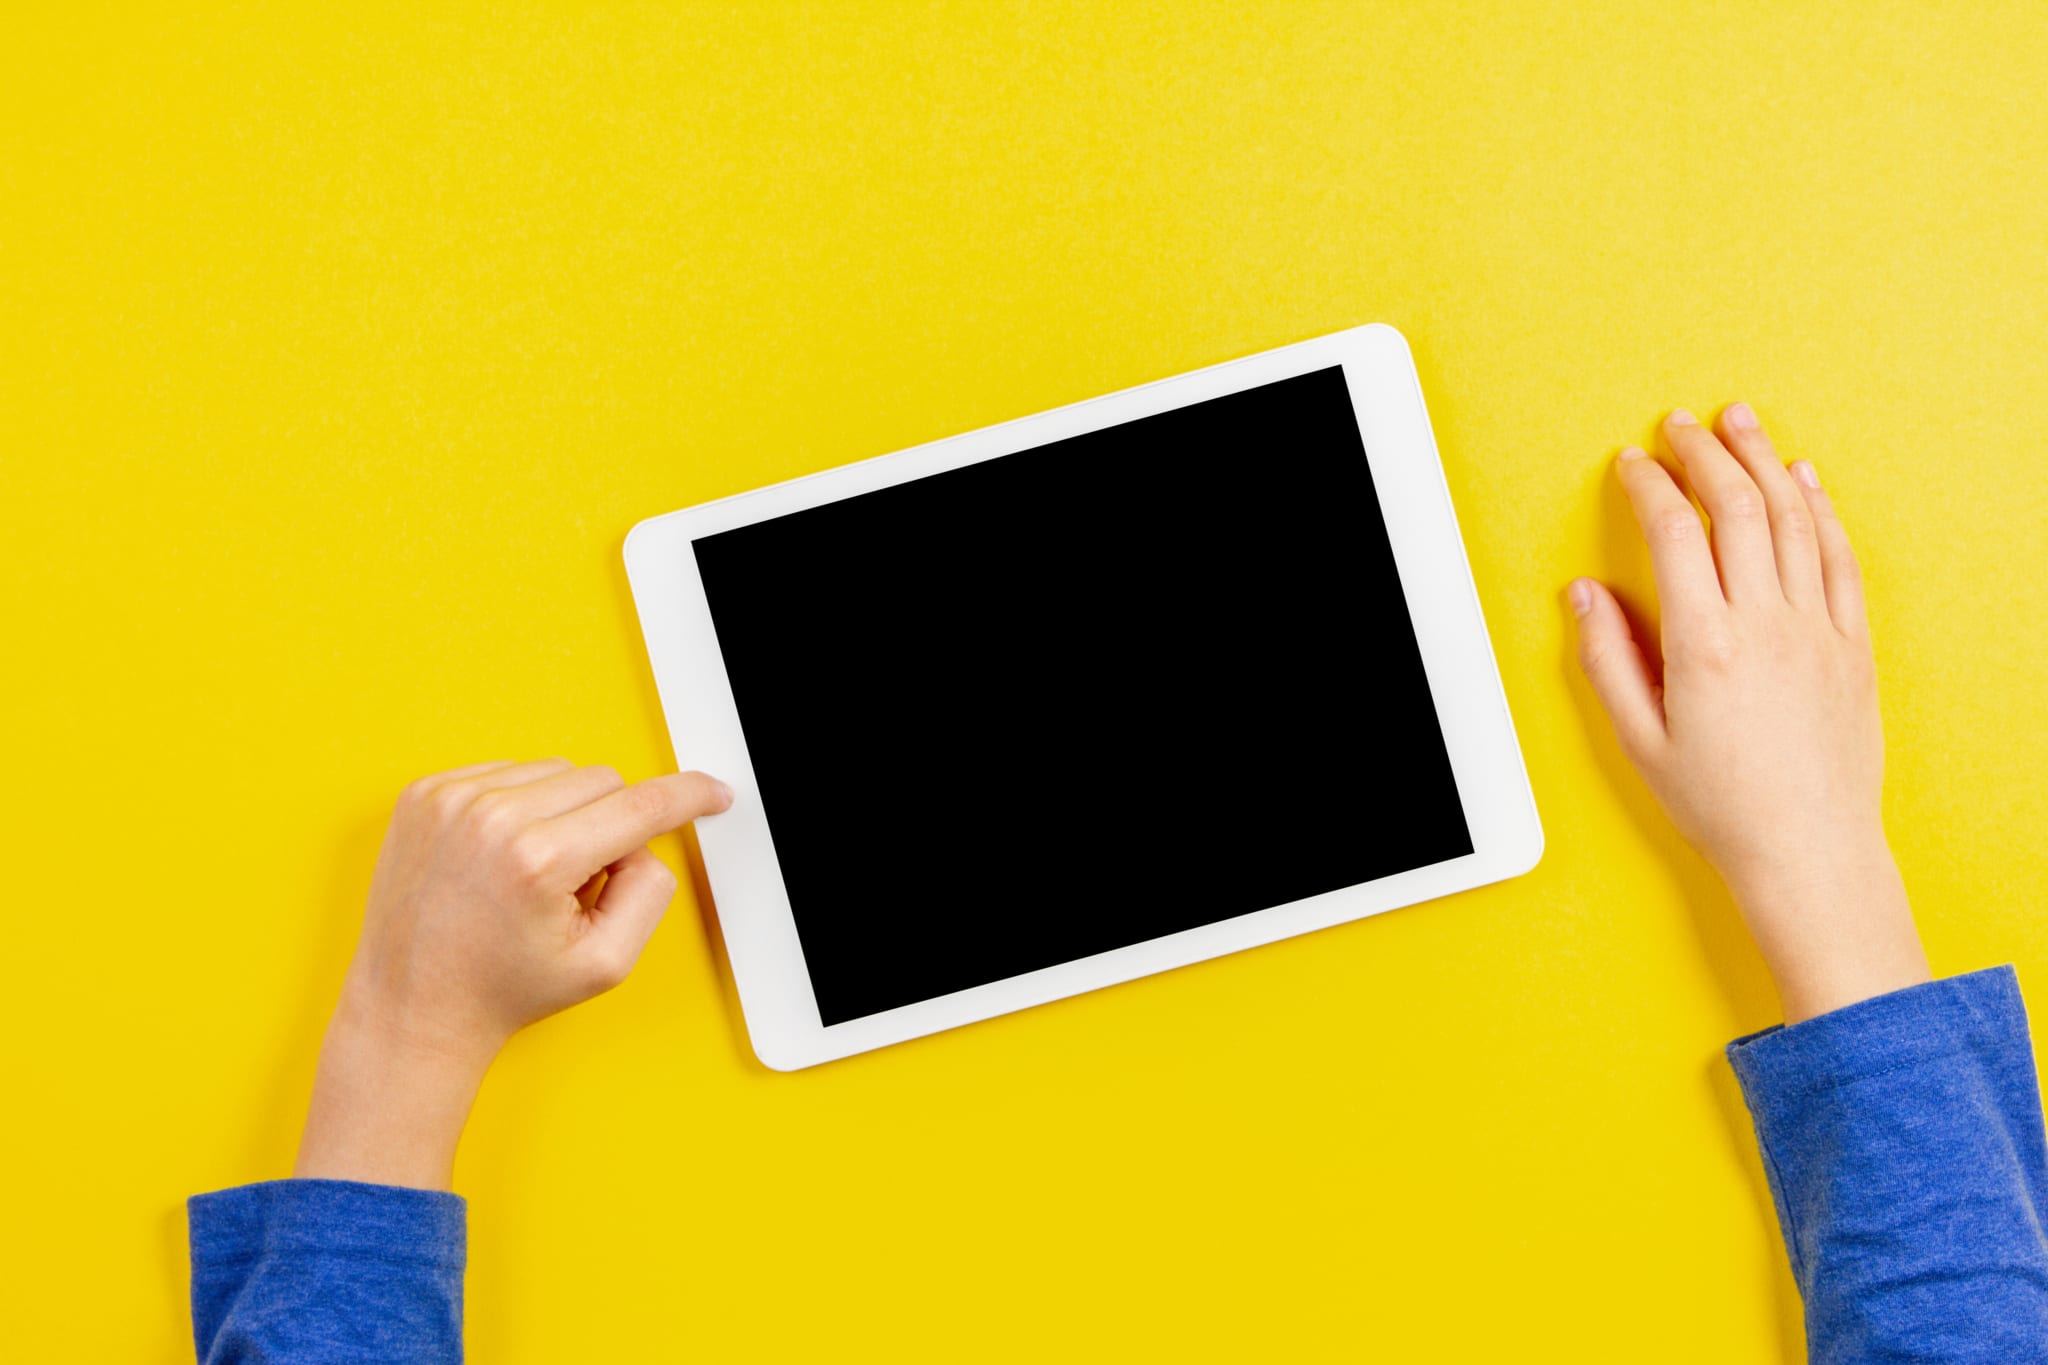 Kid hands with tablet computer on yellow background stock photo